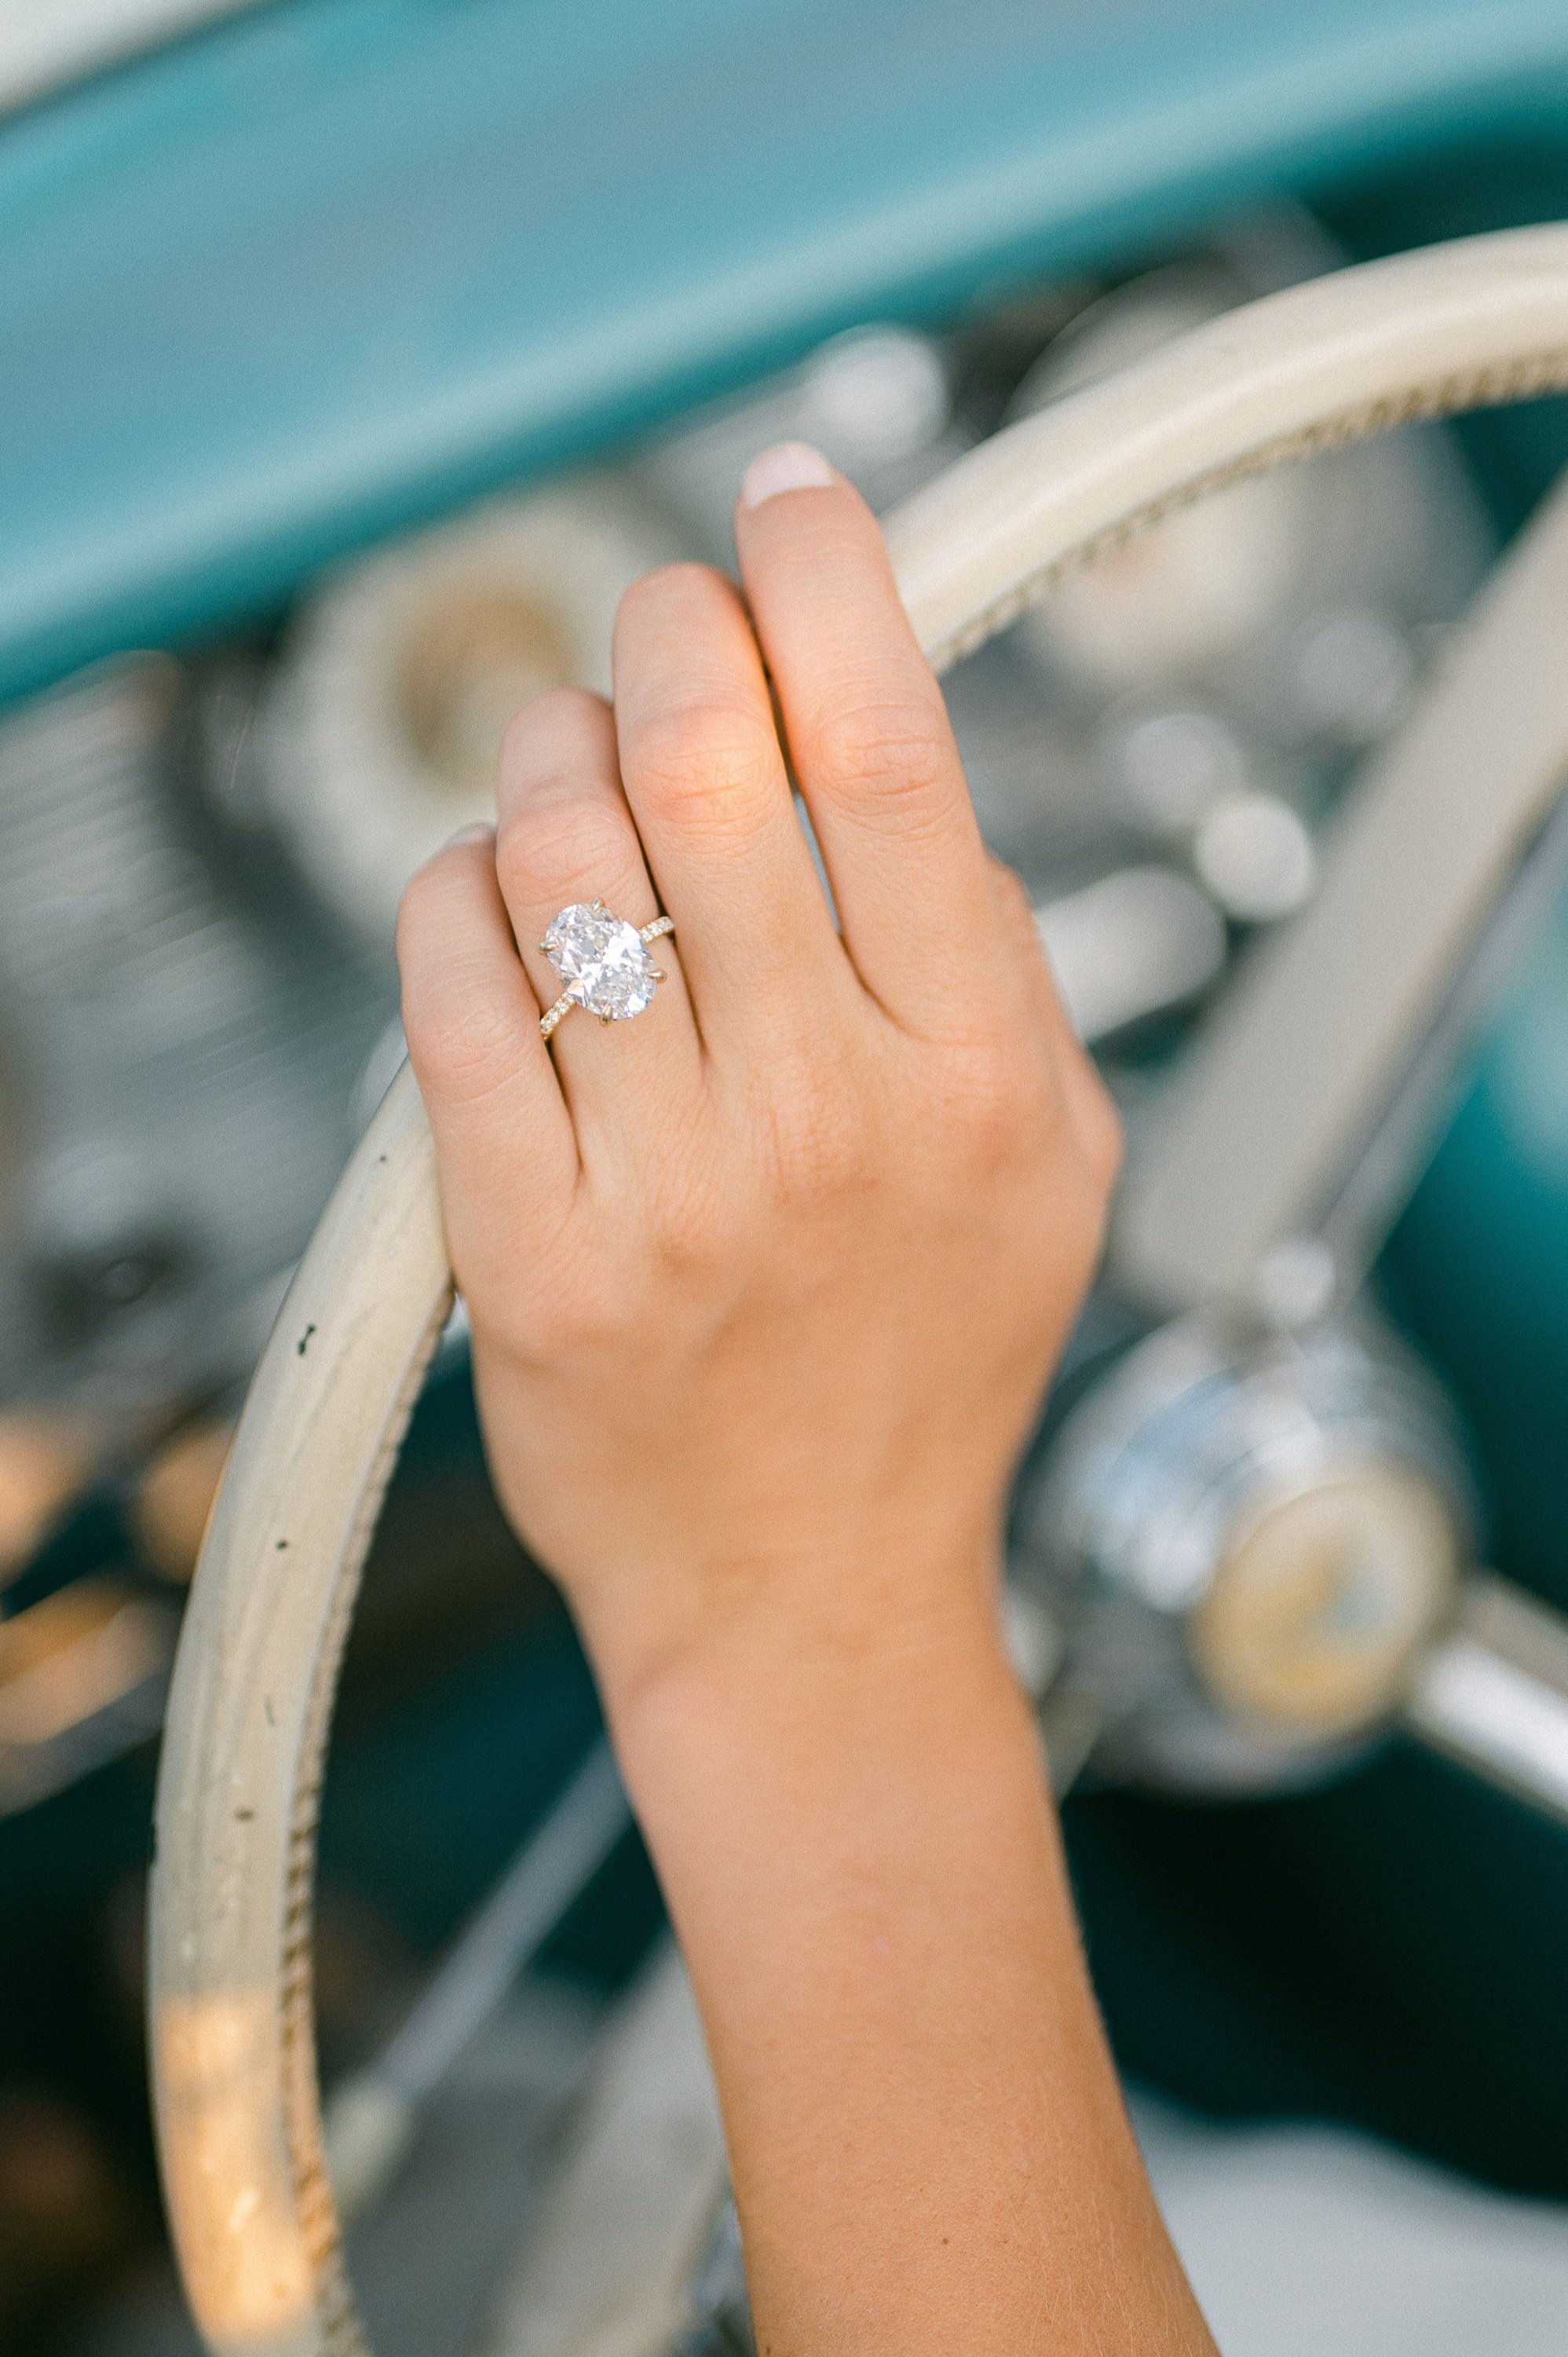 Best Engagement Rings | Top 20 Most Popular Engagement Rings